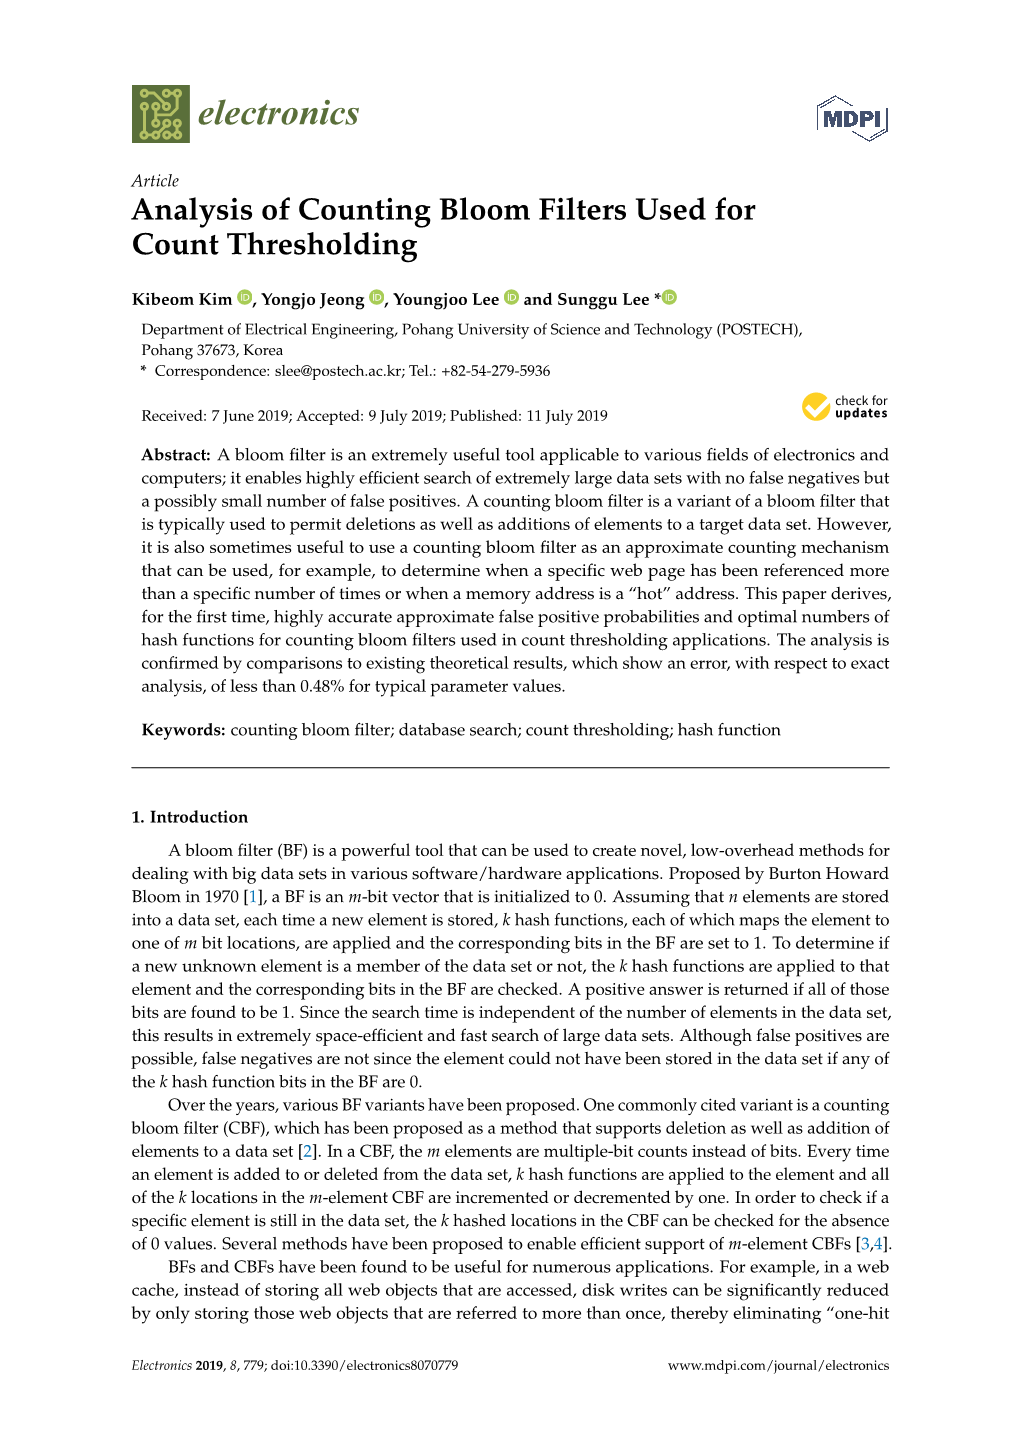 Analysis of Counting Bloom Filters Used for Count Thresholding